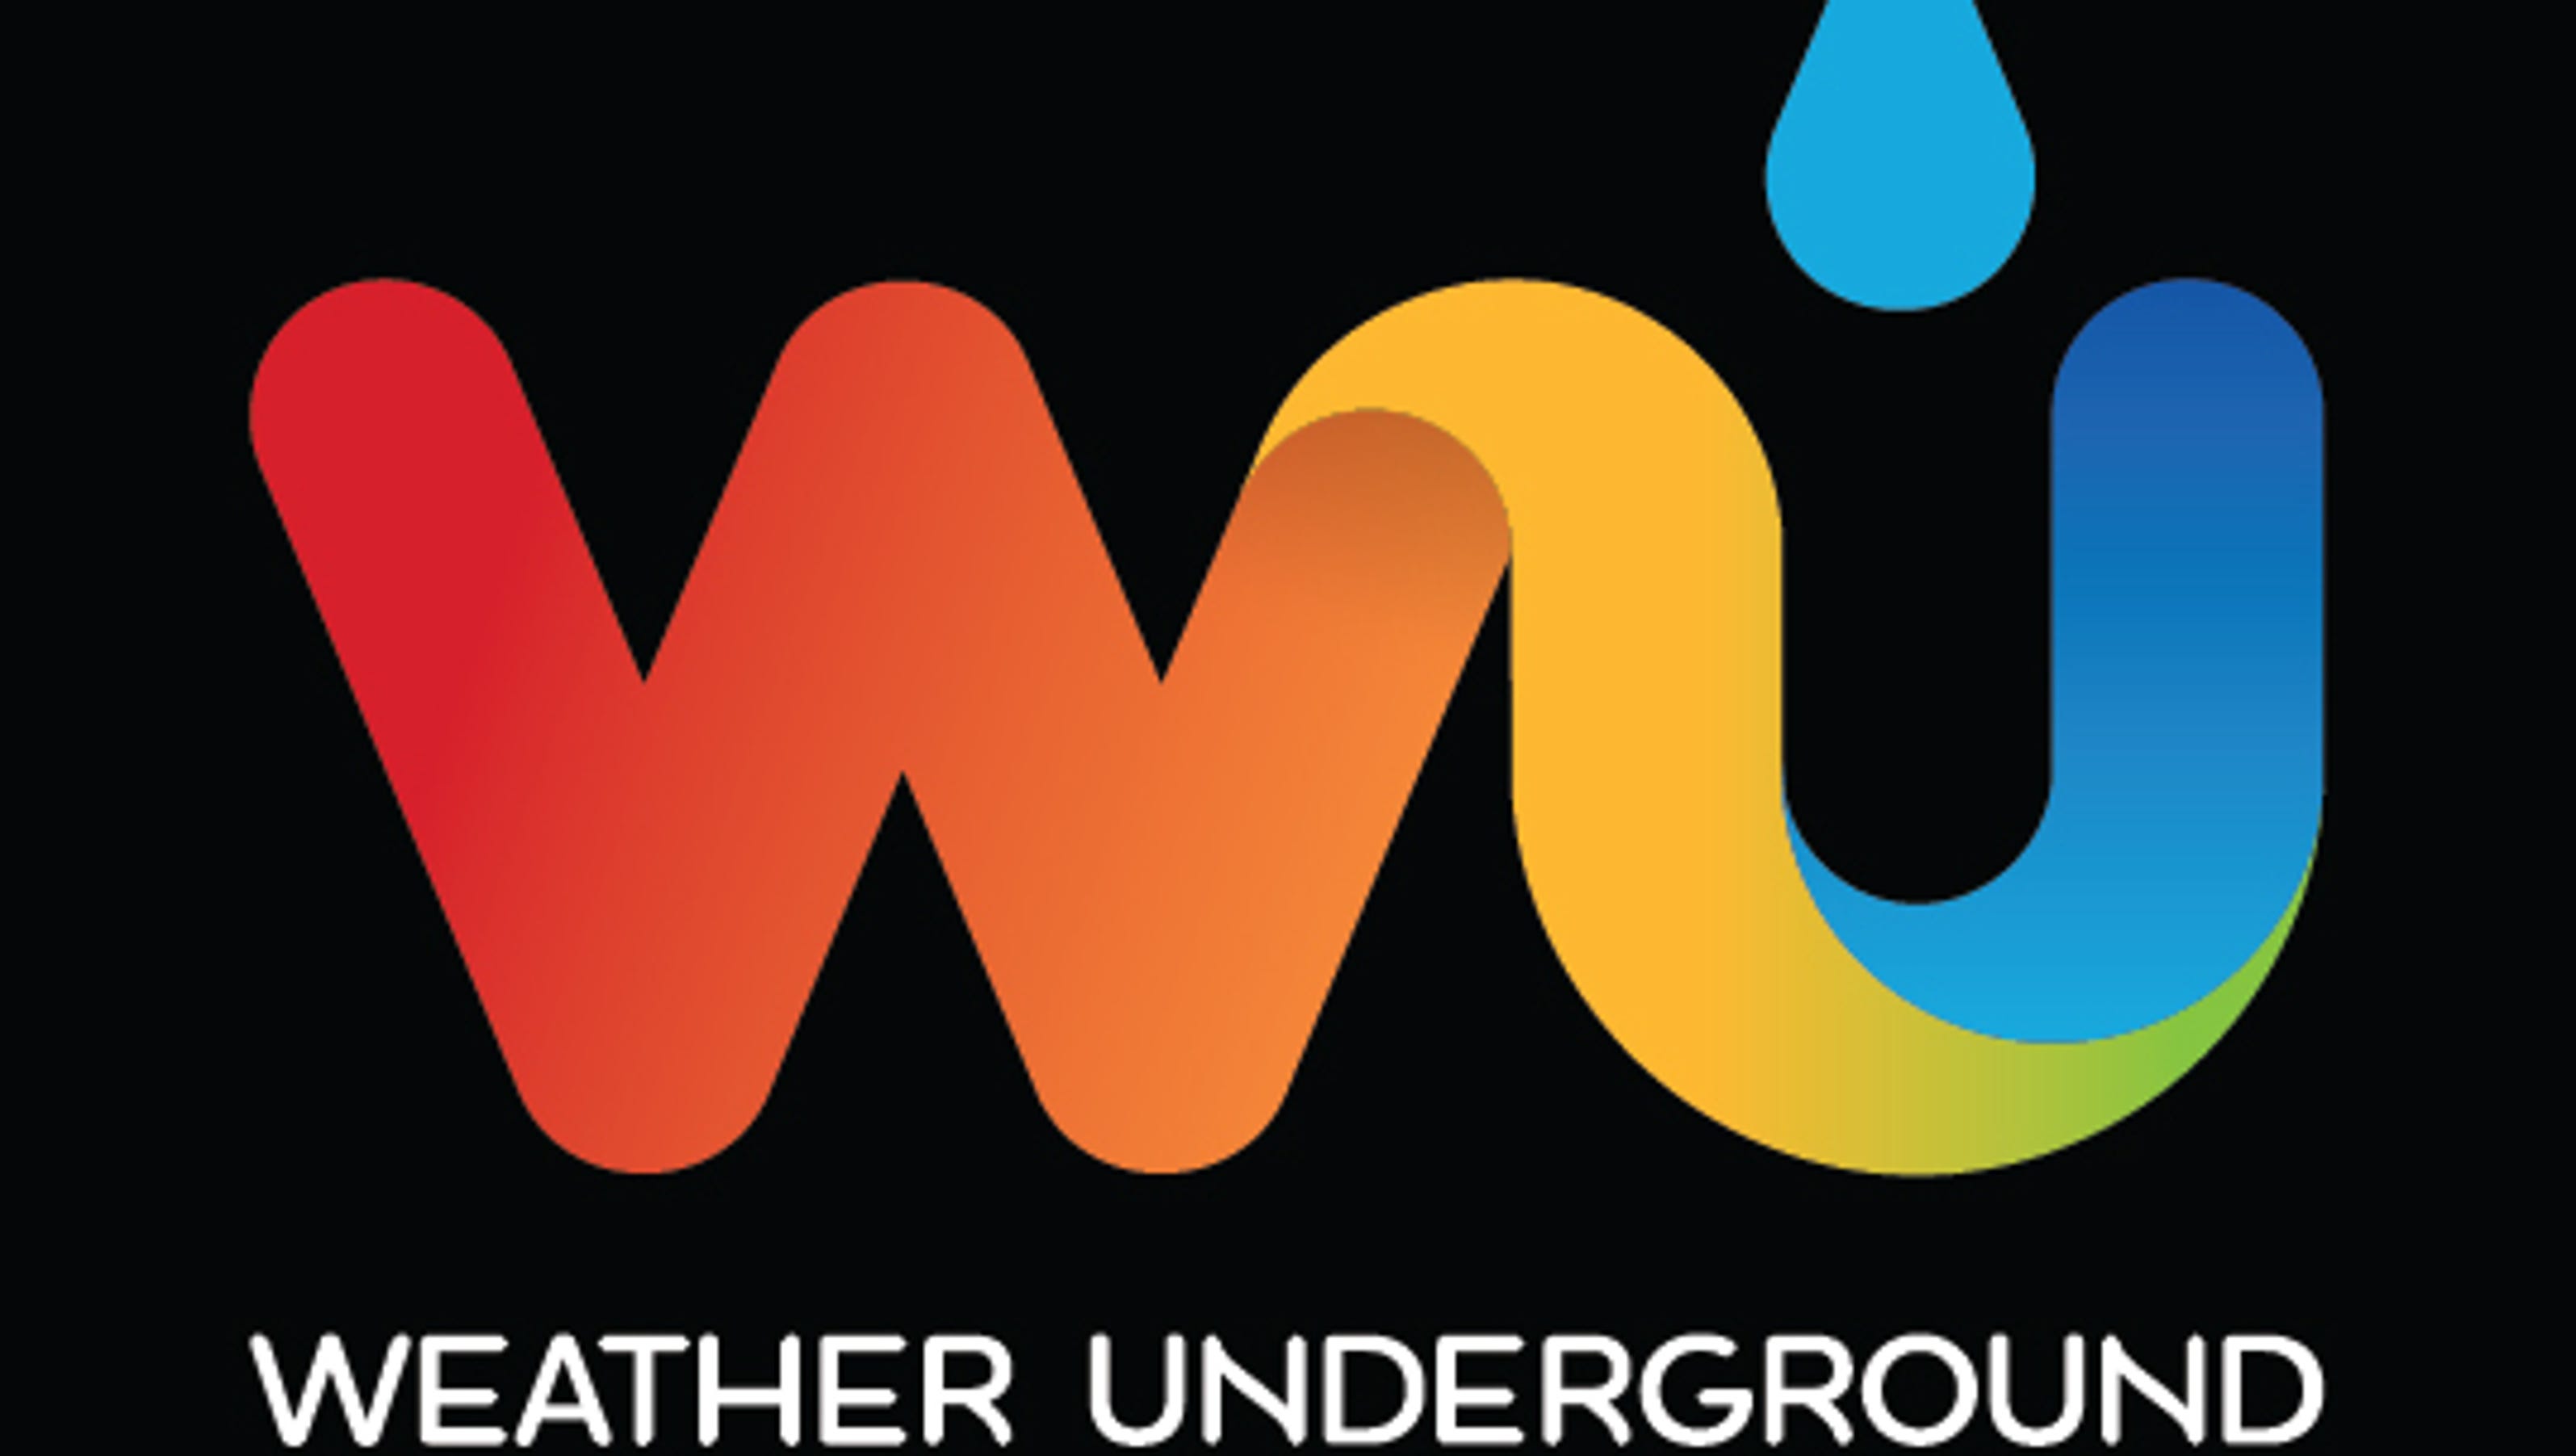 Weather Underground springs new outlook for users